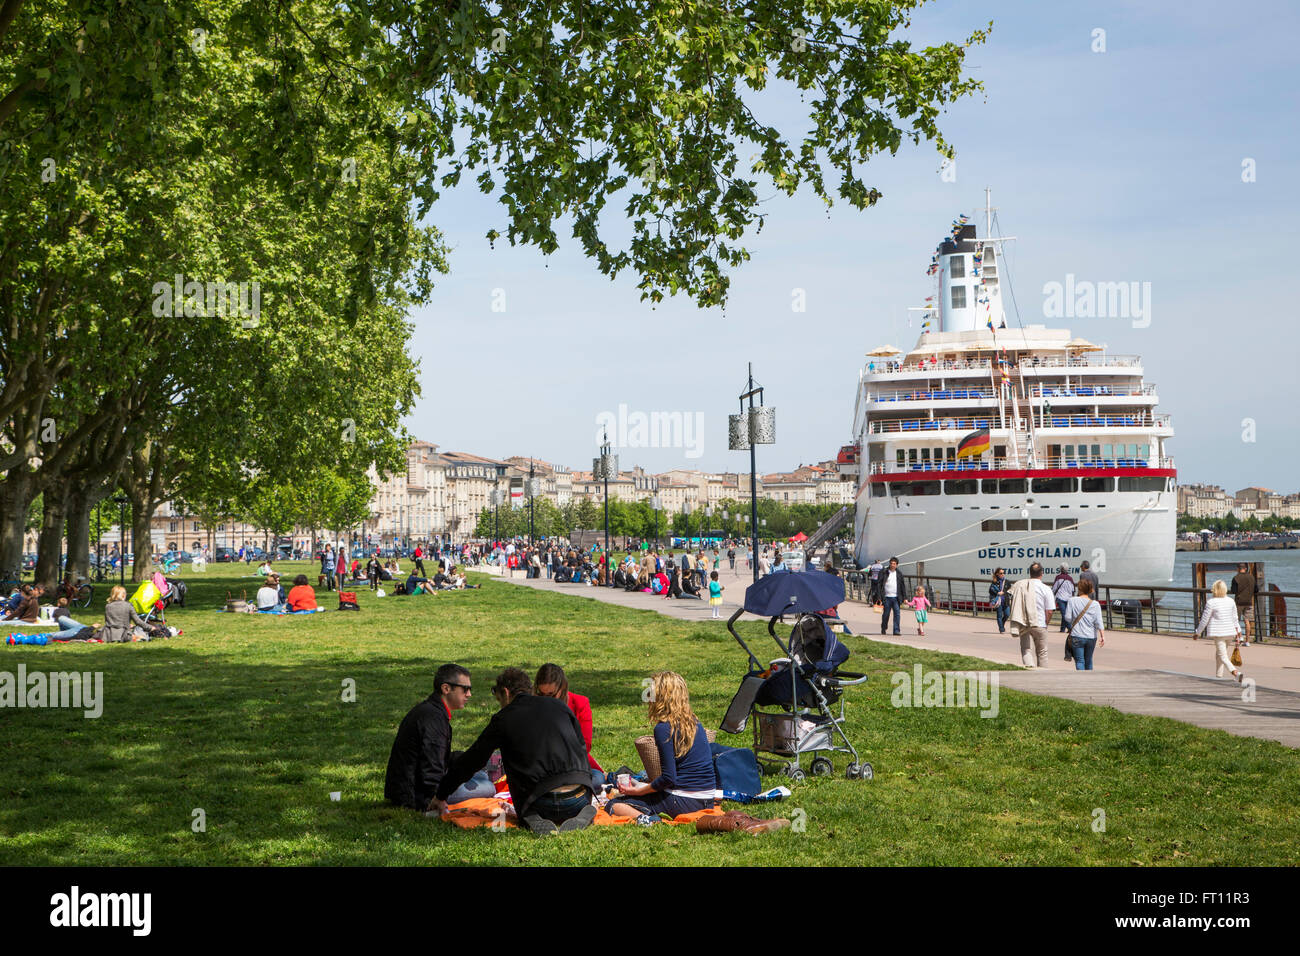 People enjoying a sunny Sunday afternoon in the park with cruise ship MS Deutschland Reederei Peter Deilmann moored along La Garonne river, Bordeaux, Gironde, Aquitane, France Stock Photo